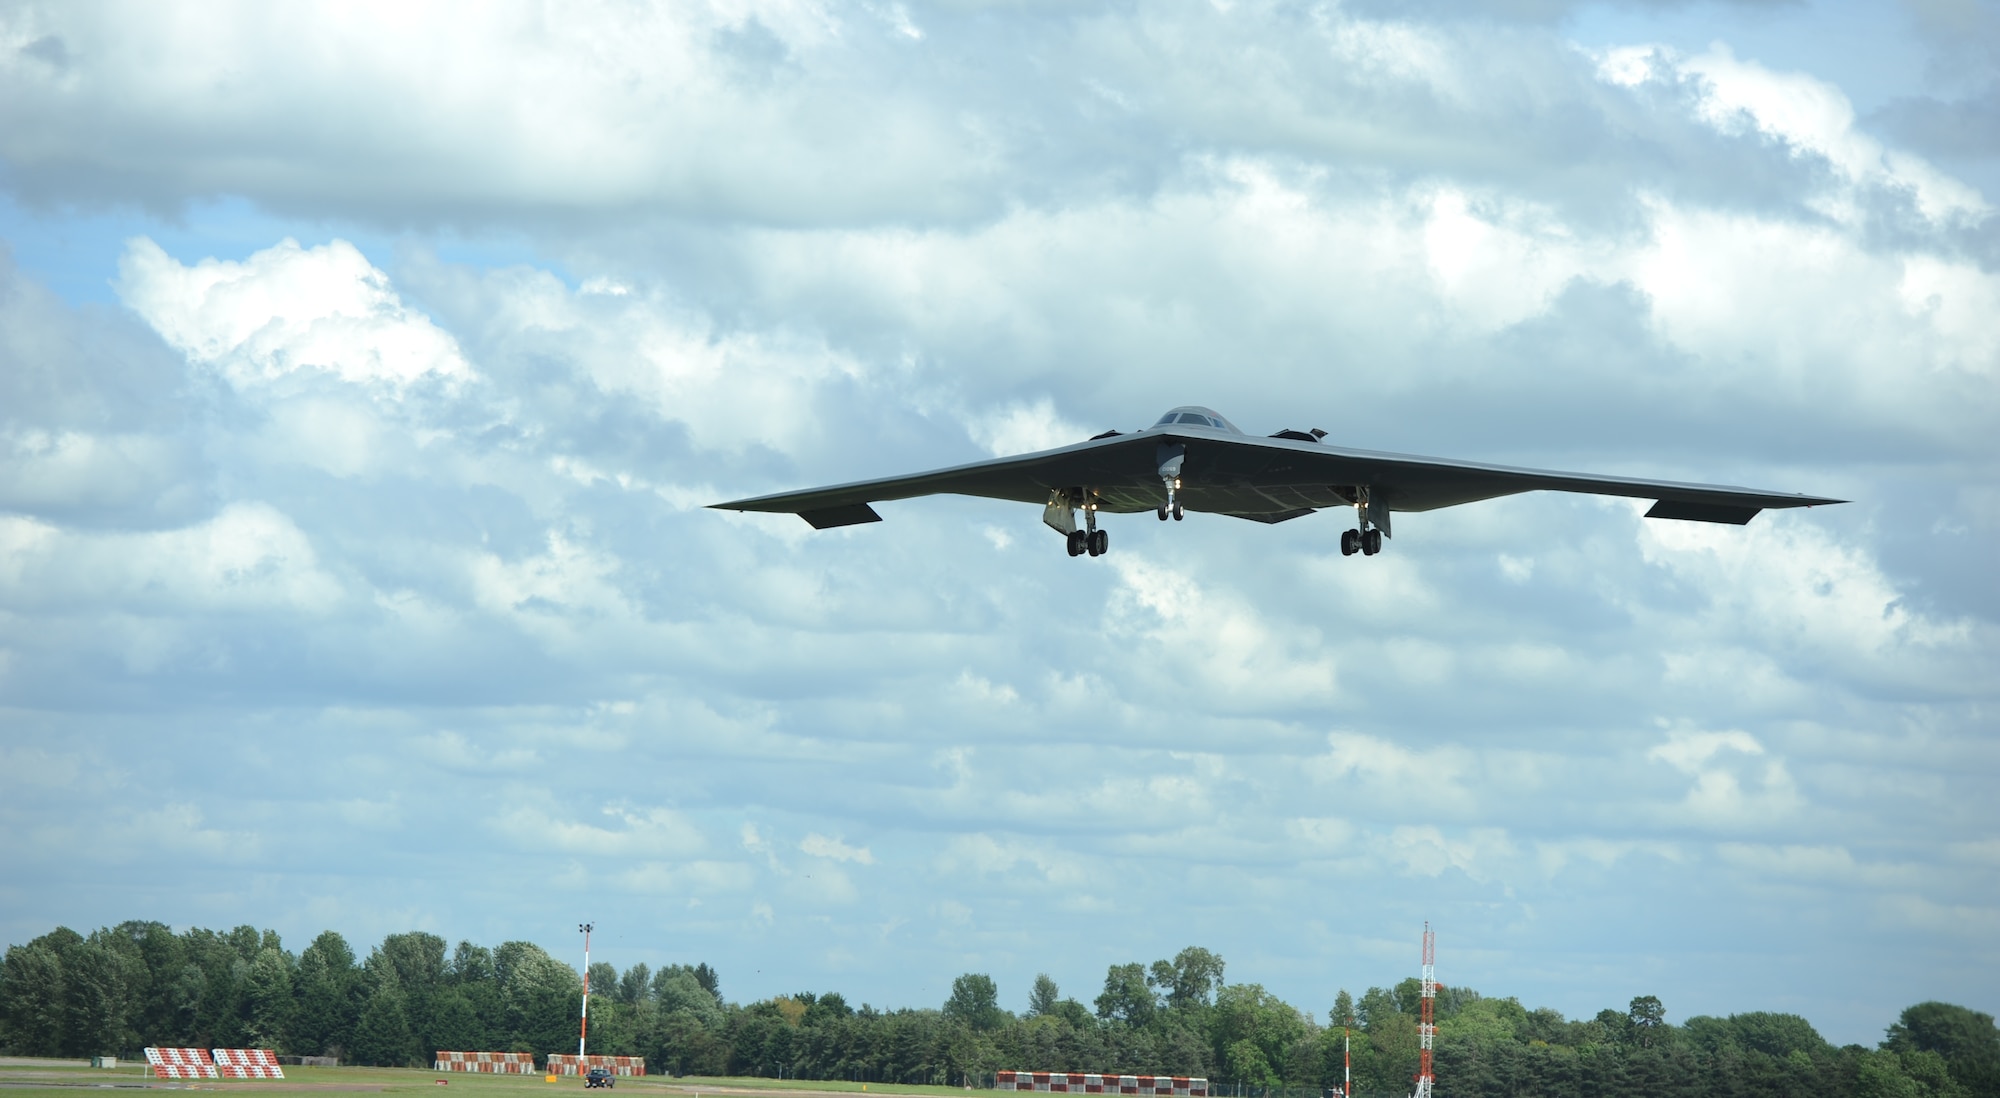 A B-2 Spirit from the 509th Bomb Wing, Whiteman Air Force Base, Missouri, prepares to land on the runway at RAF Fairford, England, June 8, 2014. The B-2 Spirit is a multi-role bomber capable of delivering both conventional and nuclear munitions. (U.S. Air Force photo by Staff Sgt. Nick Wilson/Released)